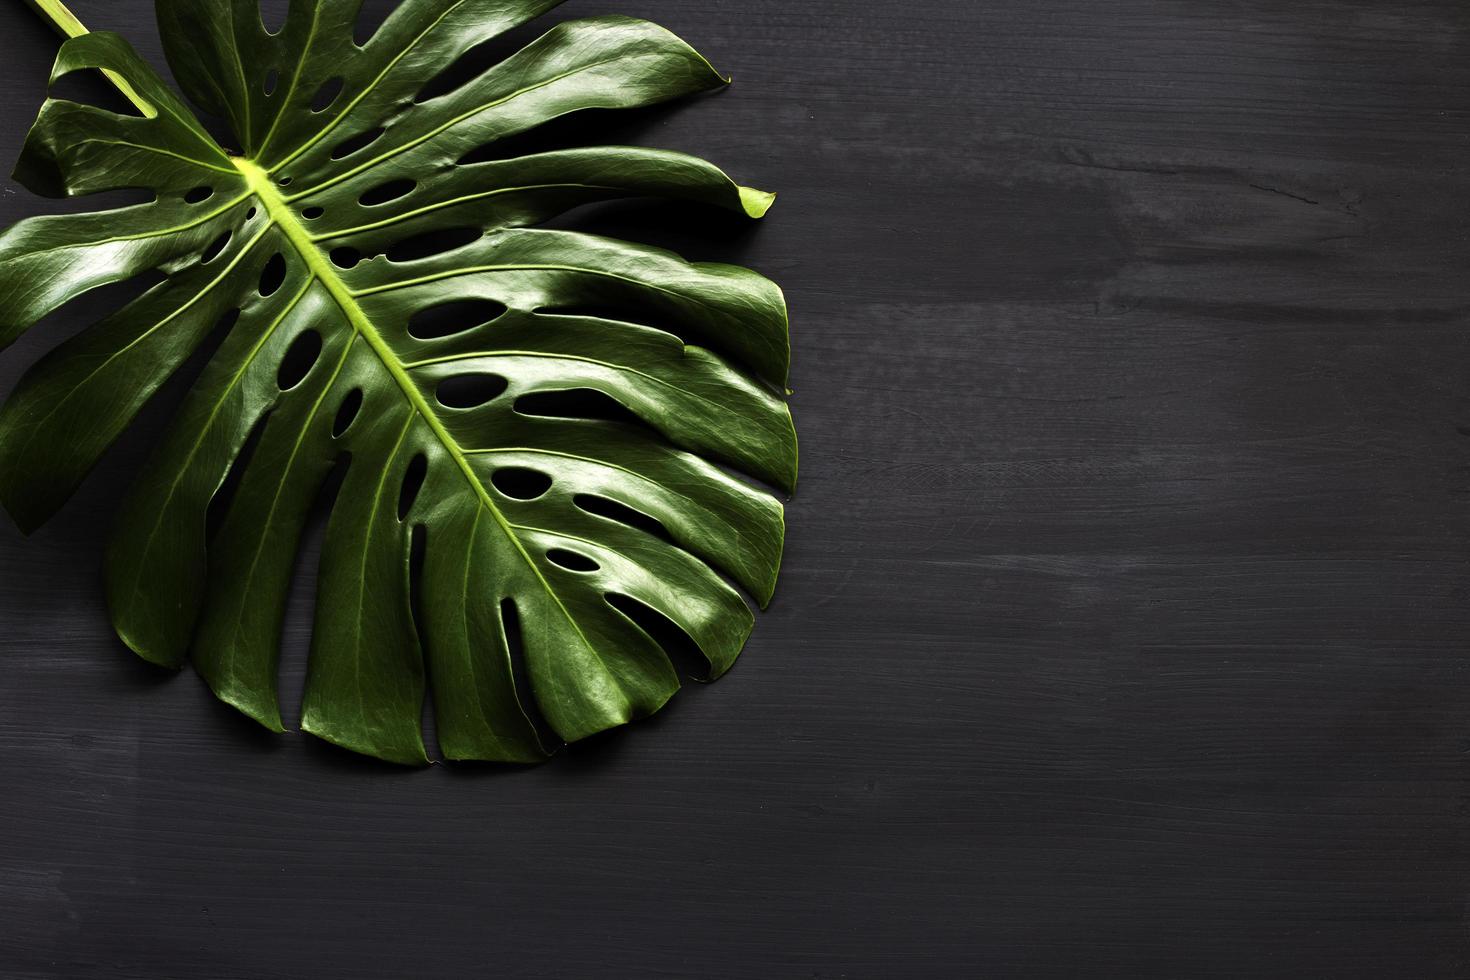 Monstera is a tropical floor. On wooden floor with black background photo